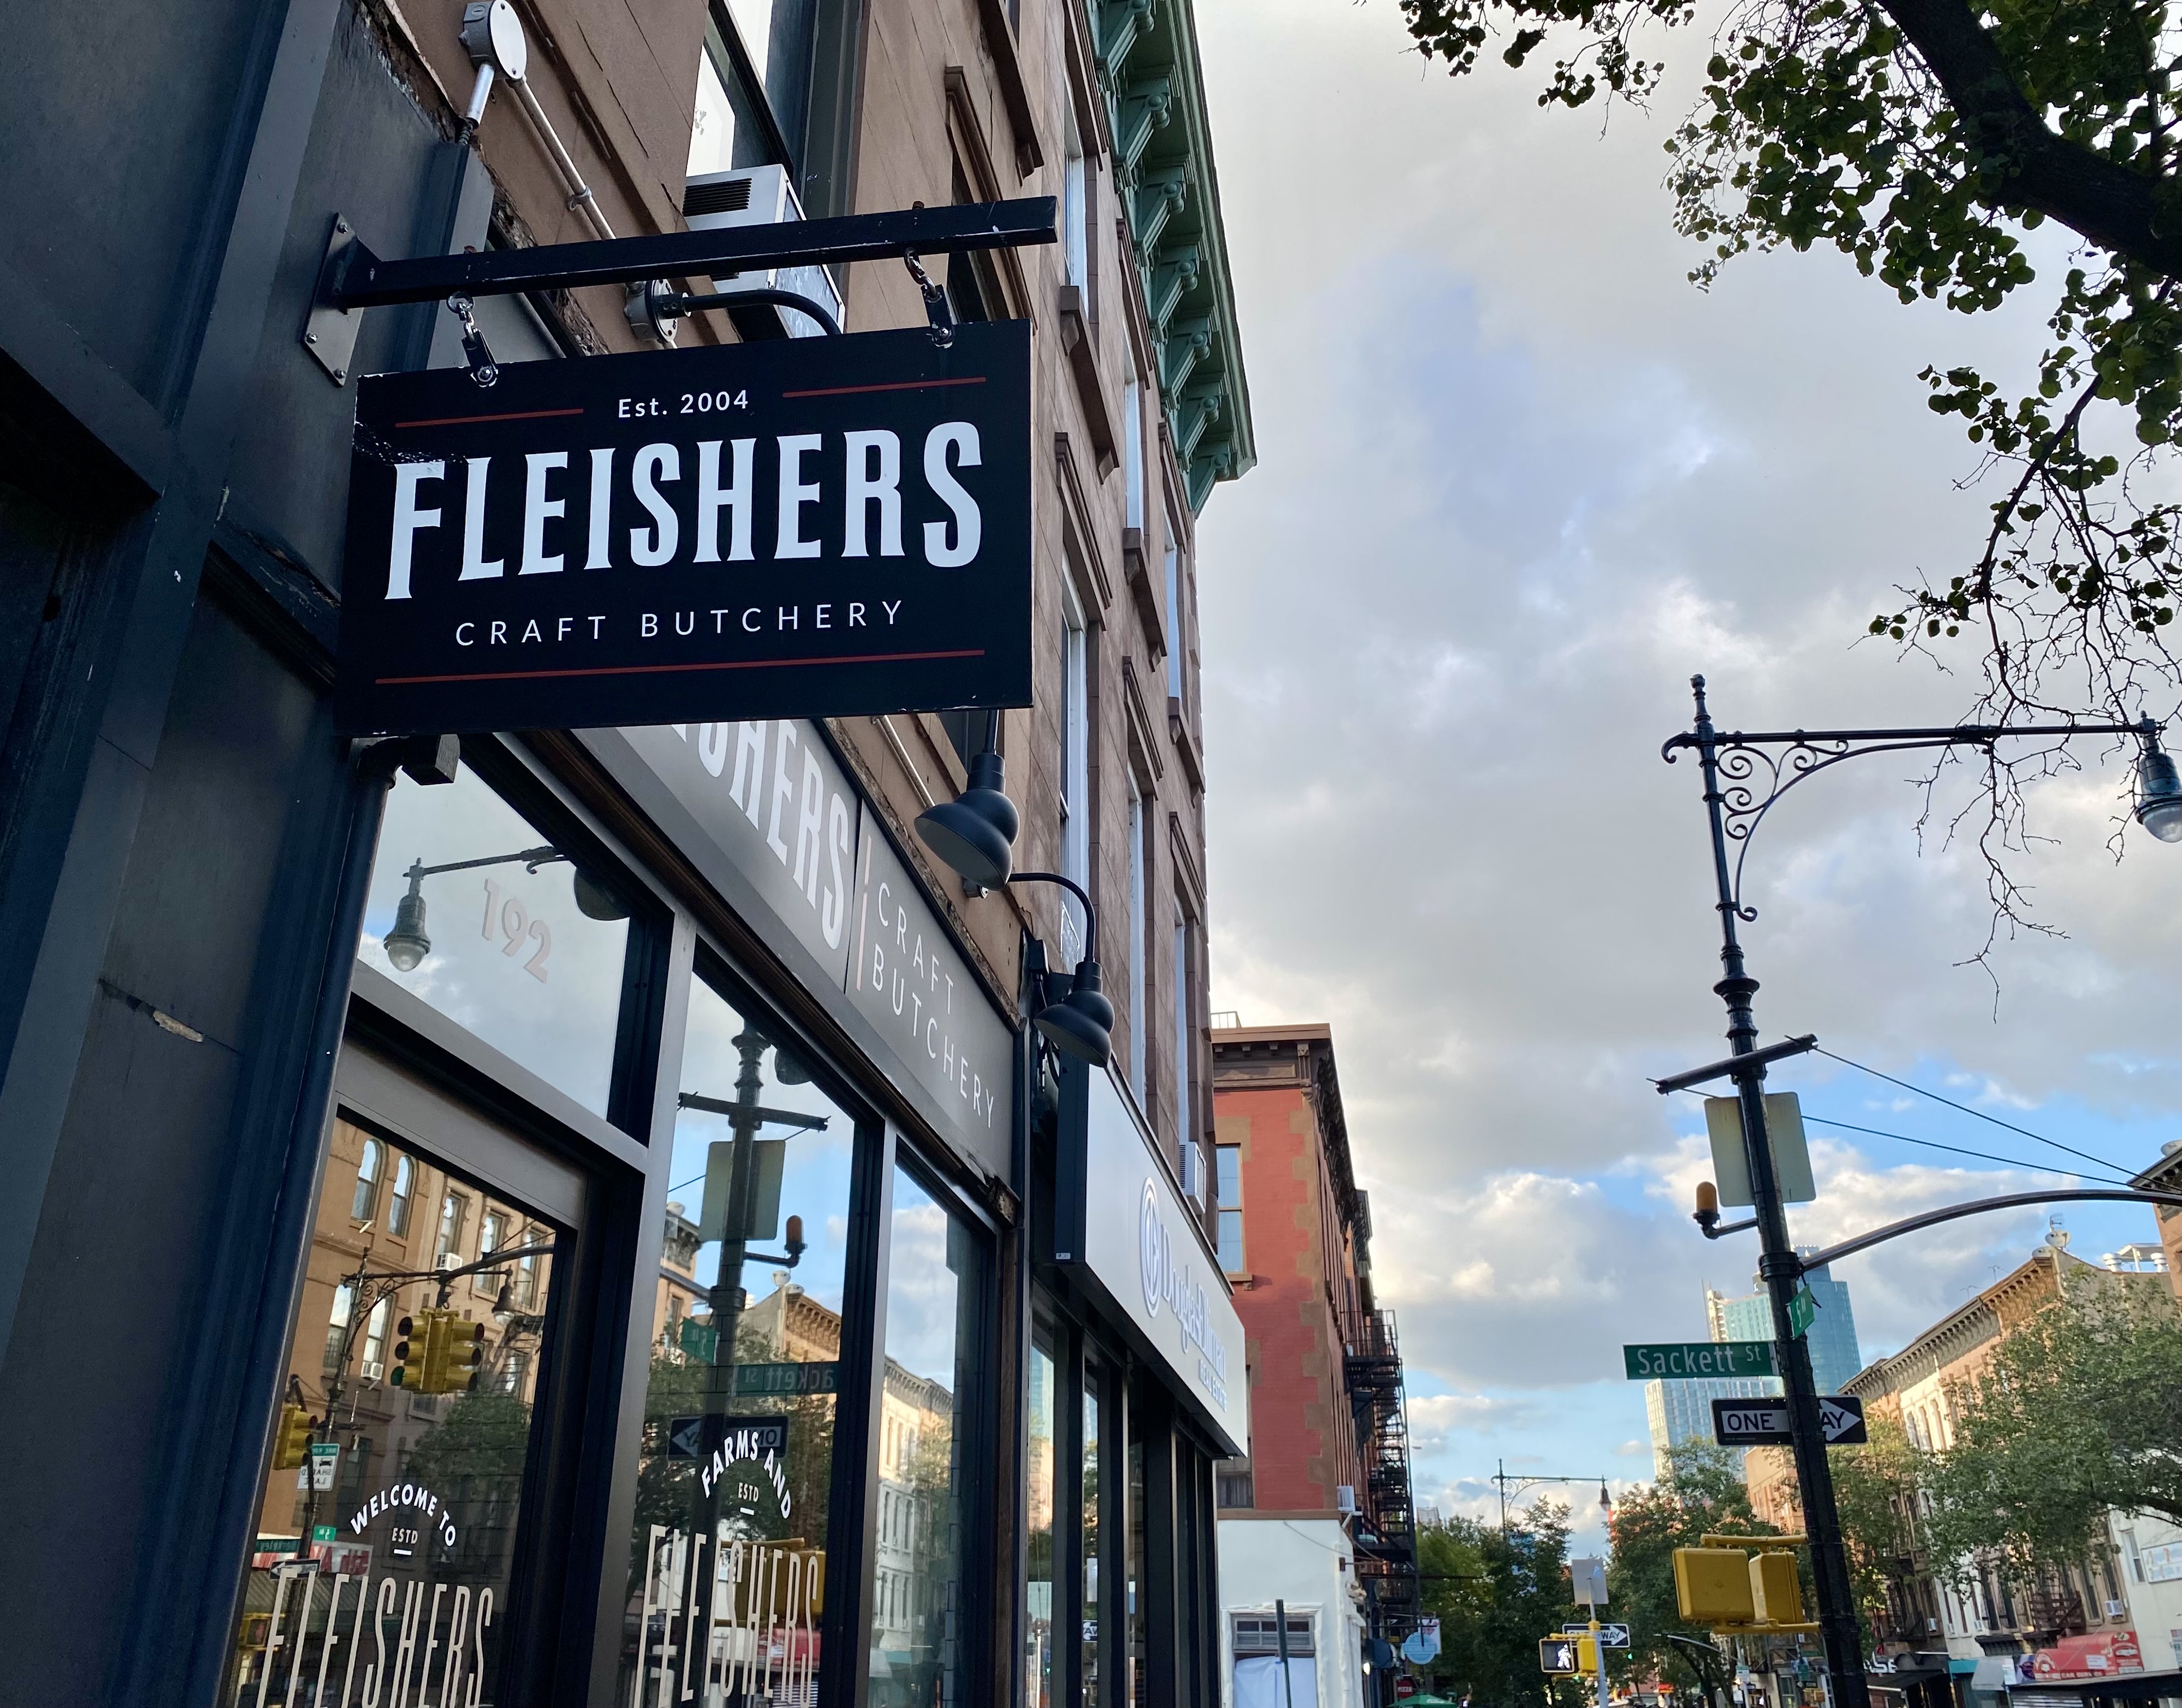 A black sign with the words “Fleishers Craft Butchery” hangs in a city street. In the background a storefront and clouds in the sky are visible.